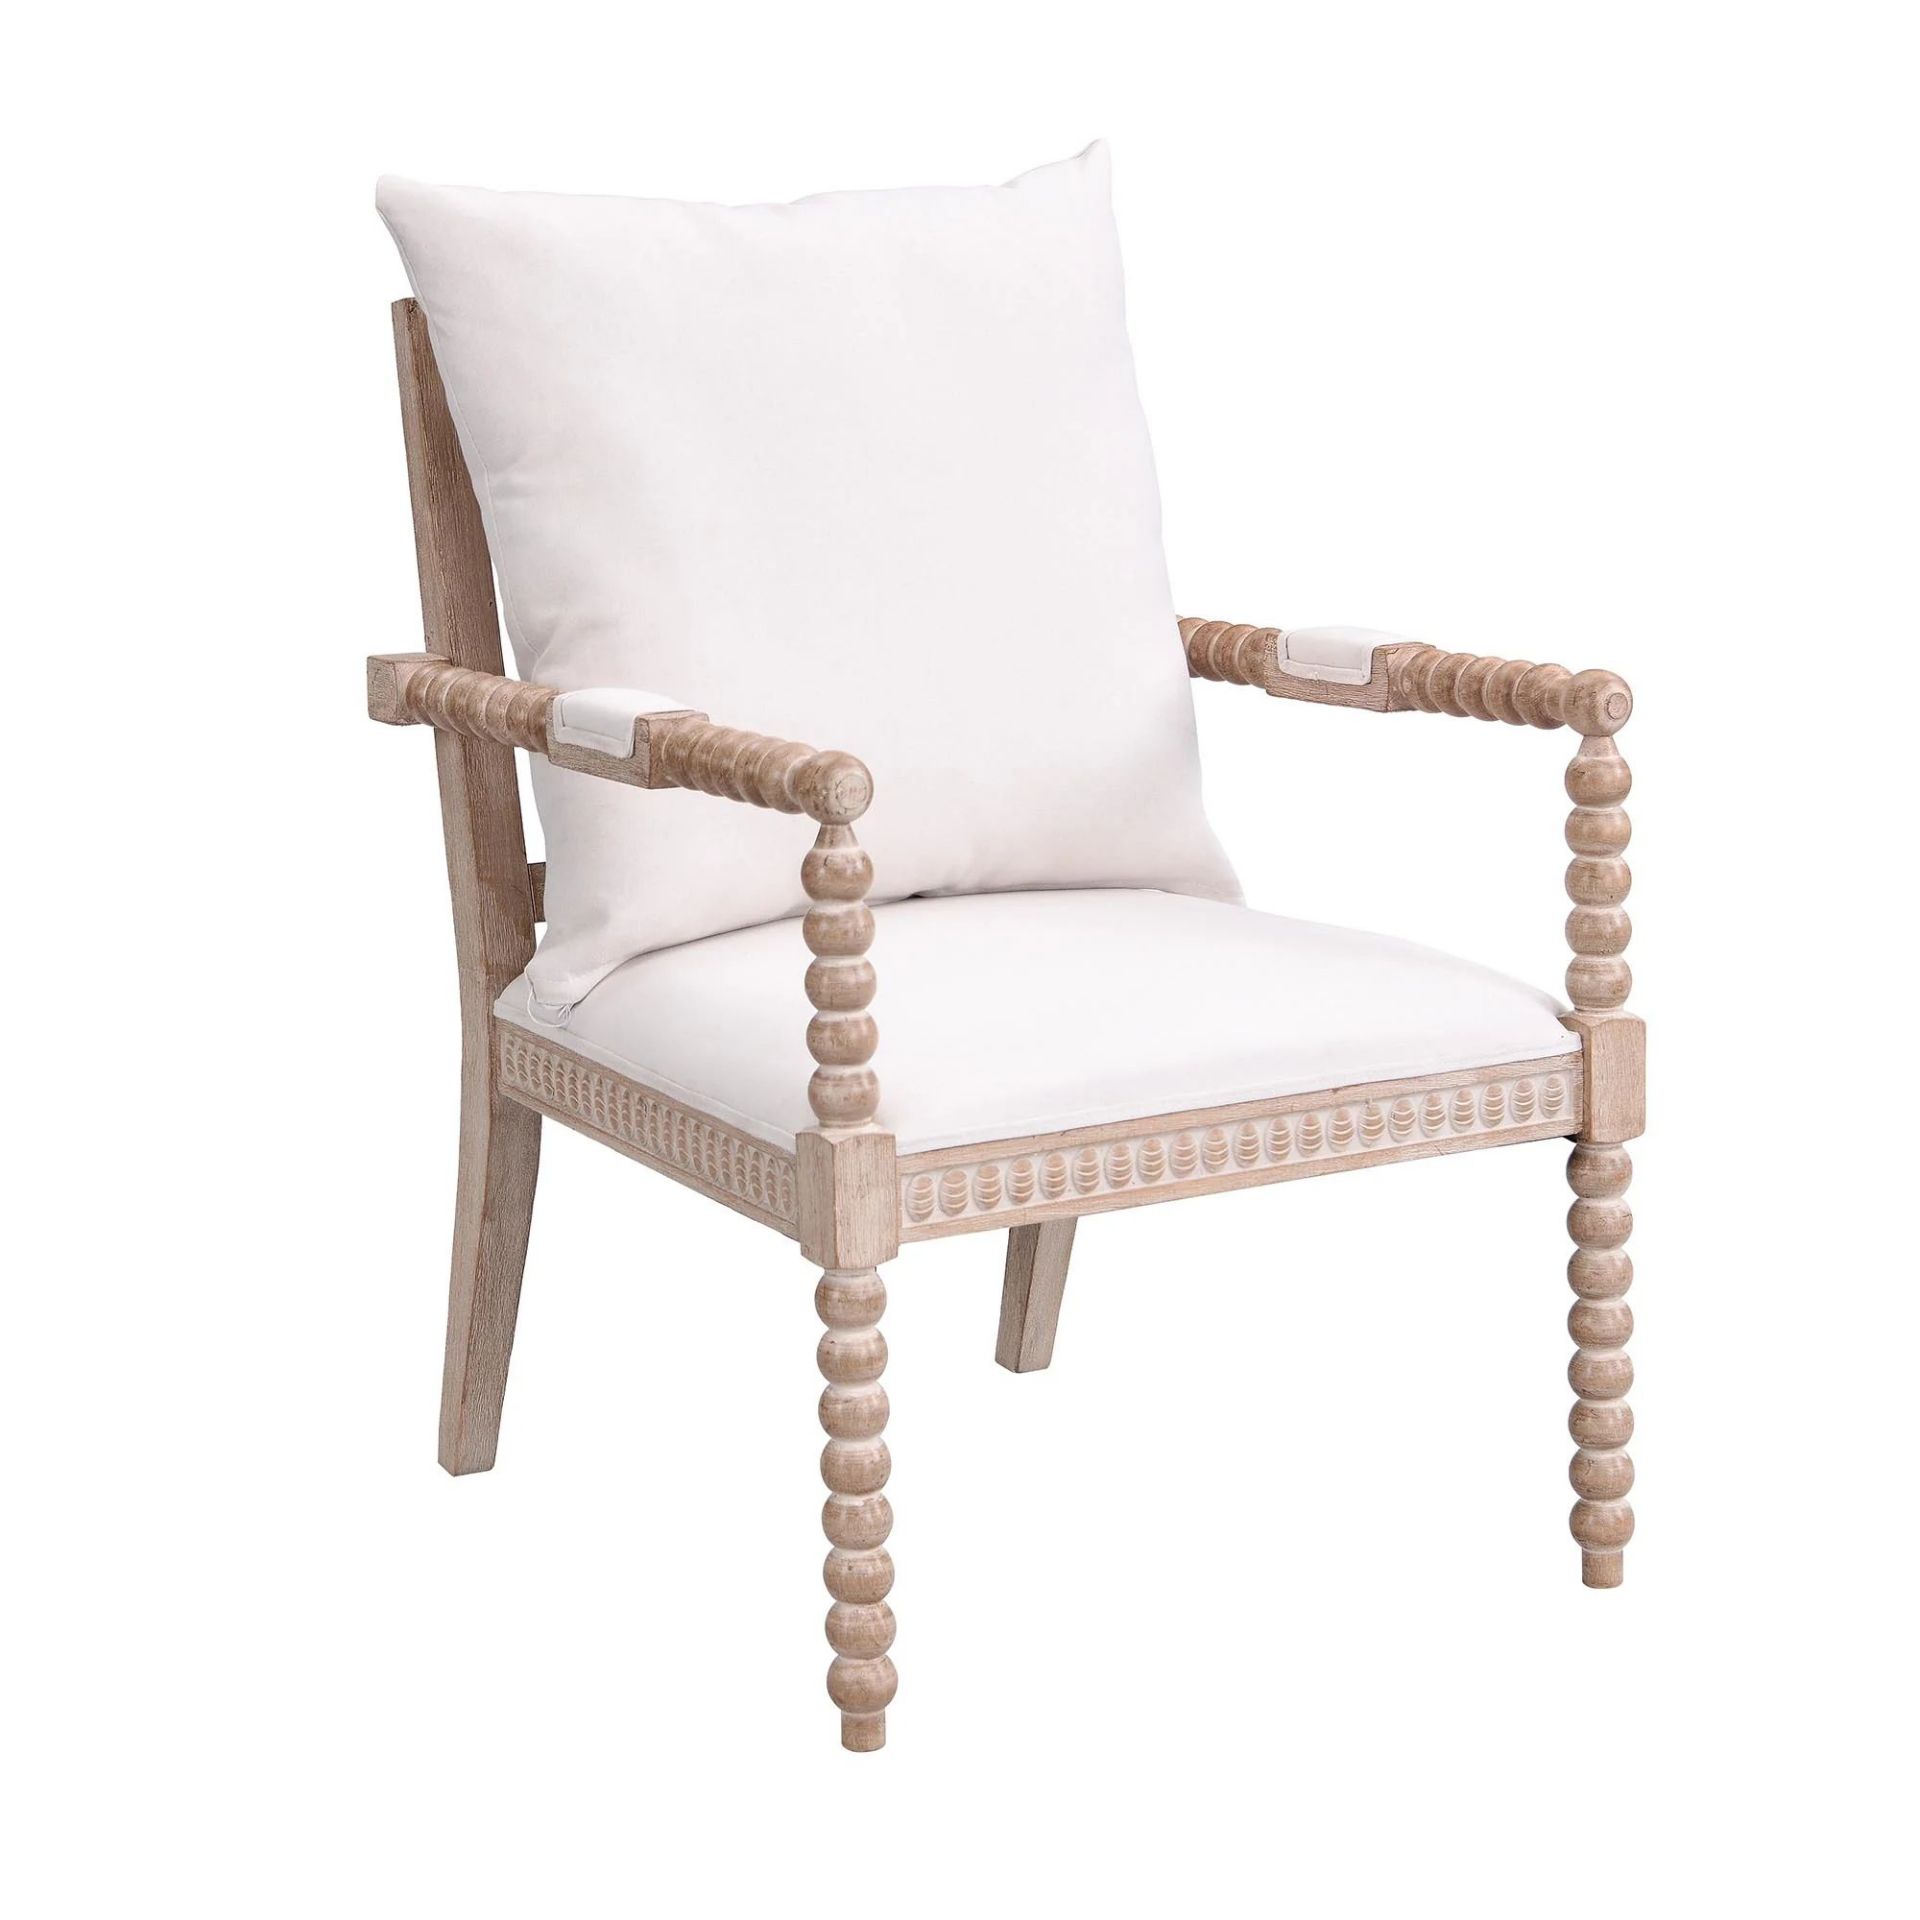 Hemingford Beige Fabric Bobbin Armchair. - R14. RRP £299.99. Inspired by the 17th century style, our - Image 2 of 2